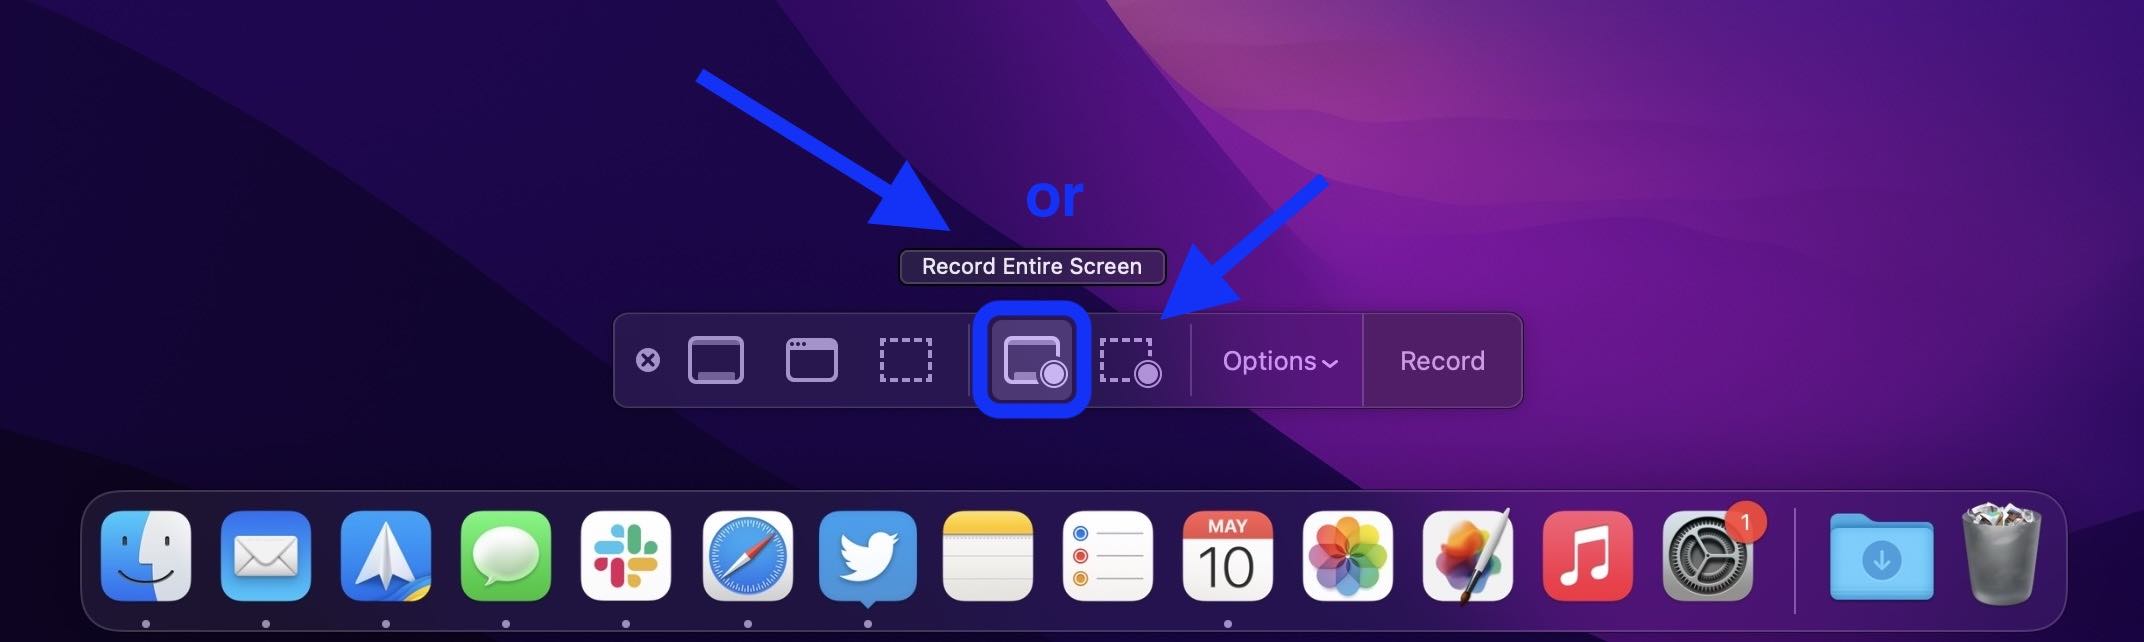 Screen record on Mac: Tips and tricks from basics to advanced